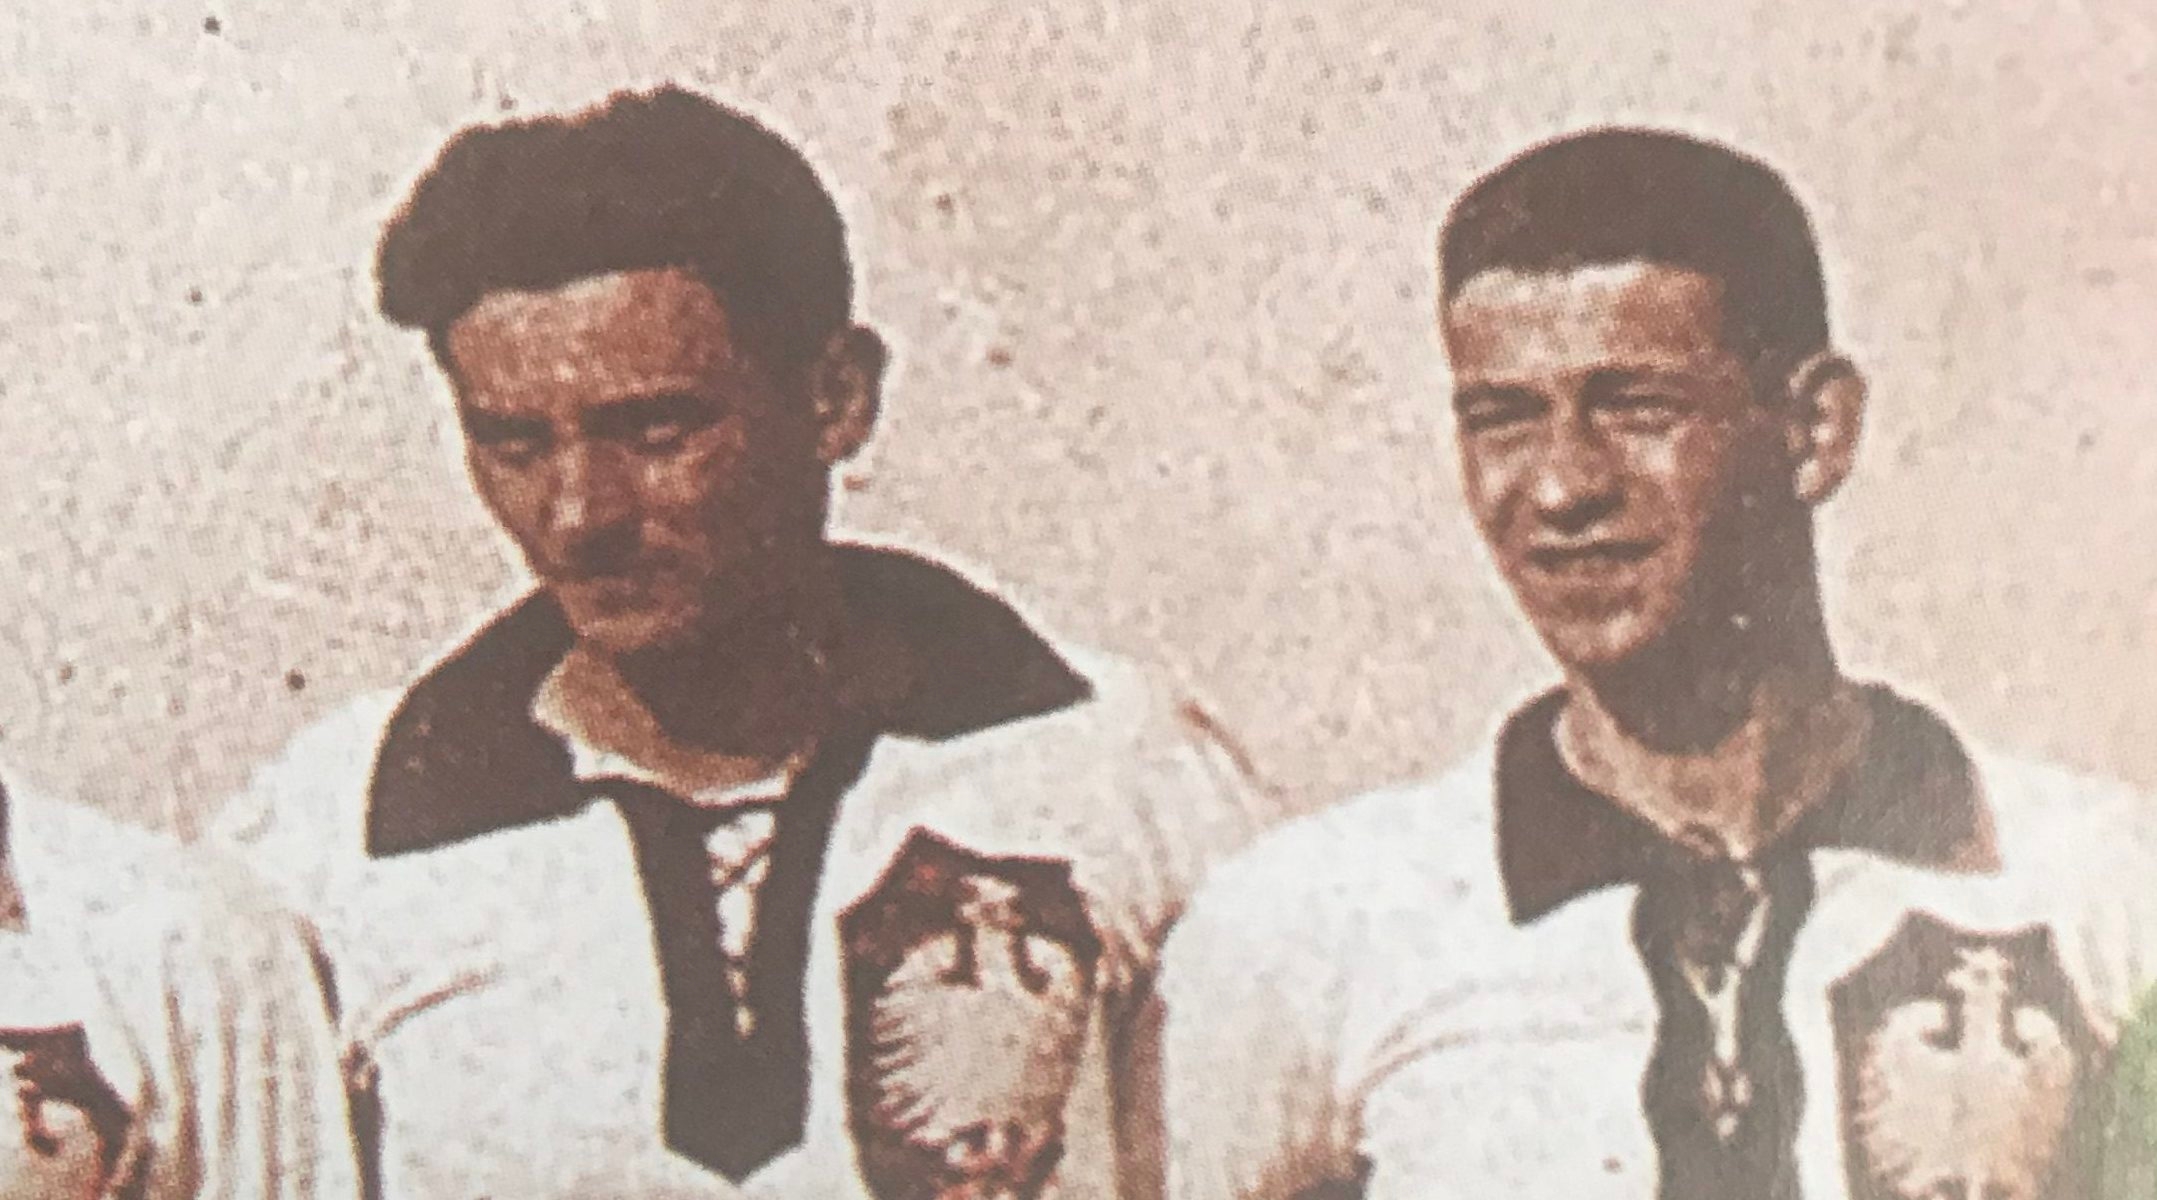 Jozef Klotz, left, with a team mate in Krakow int he 1920s. (Courtesy of From the Depths)